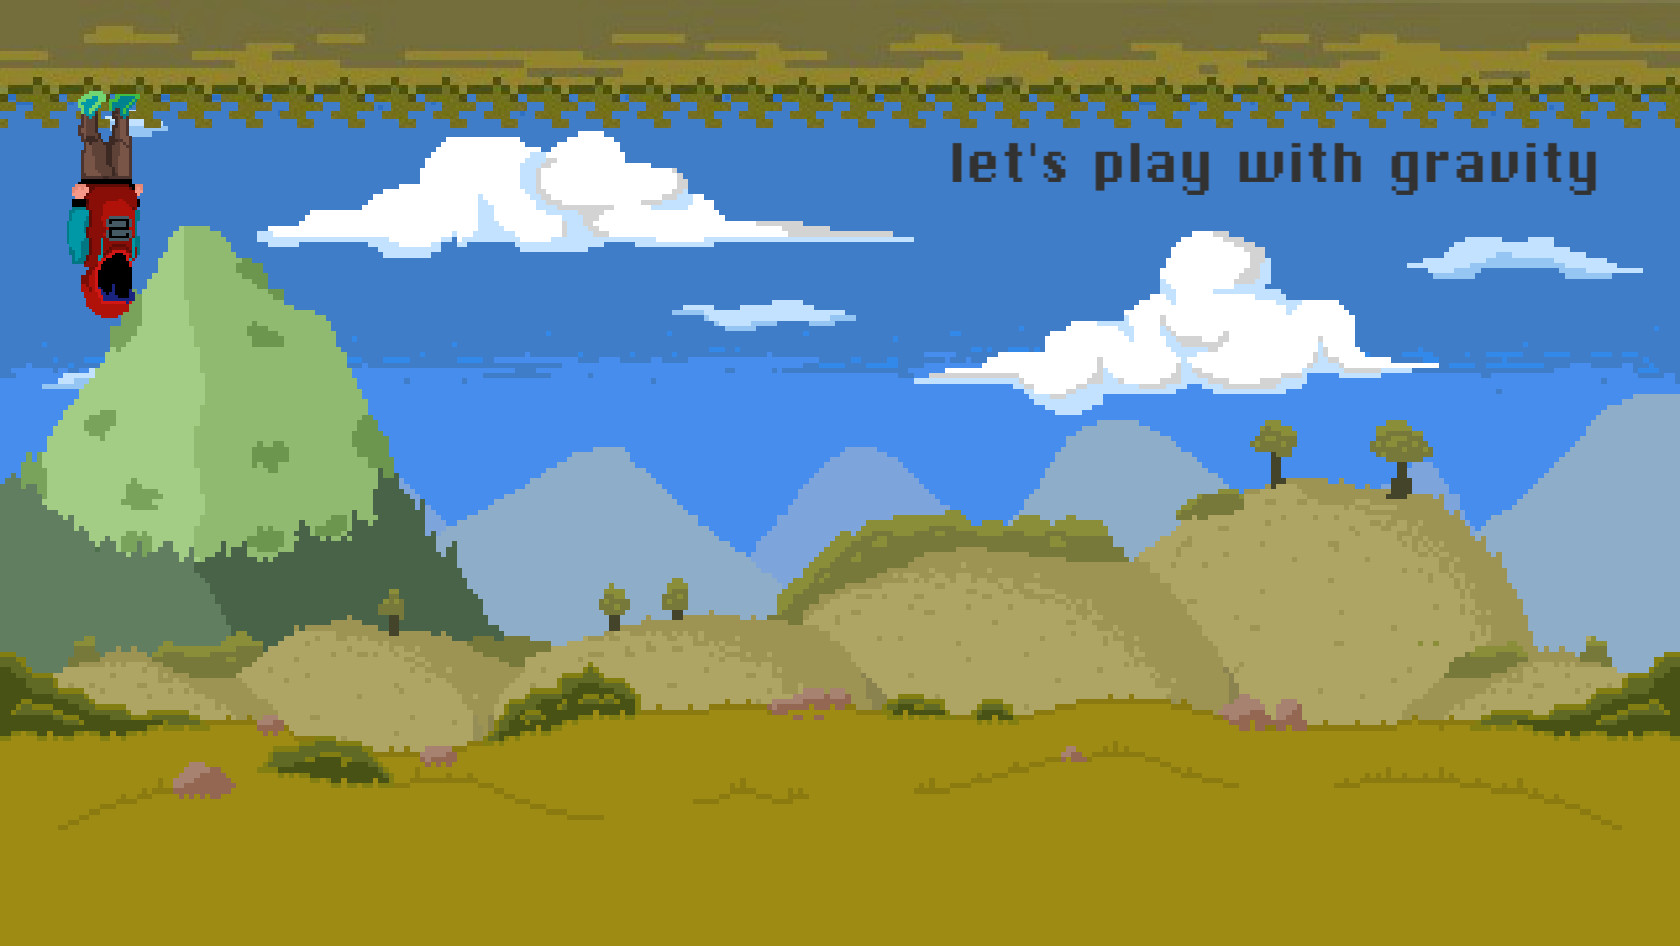 The Simplest Game screenshot